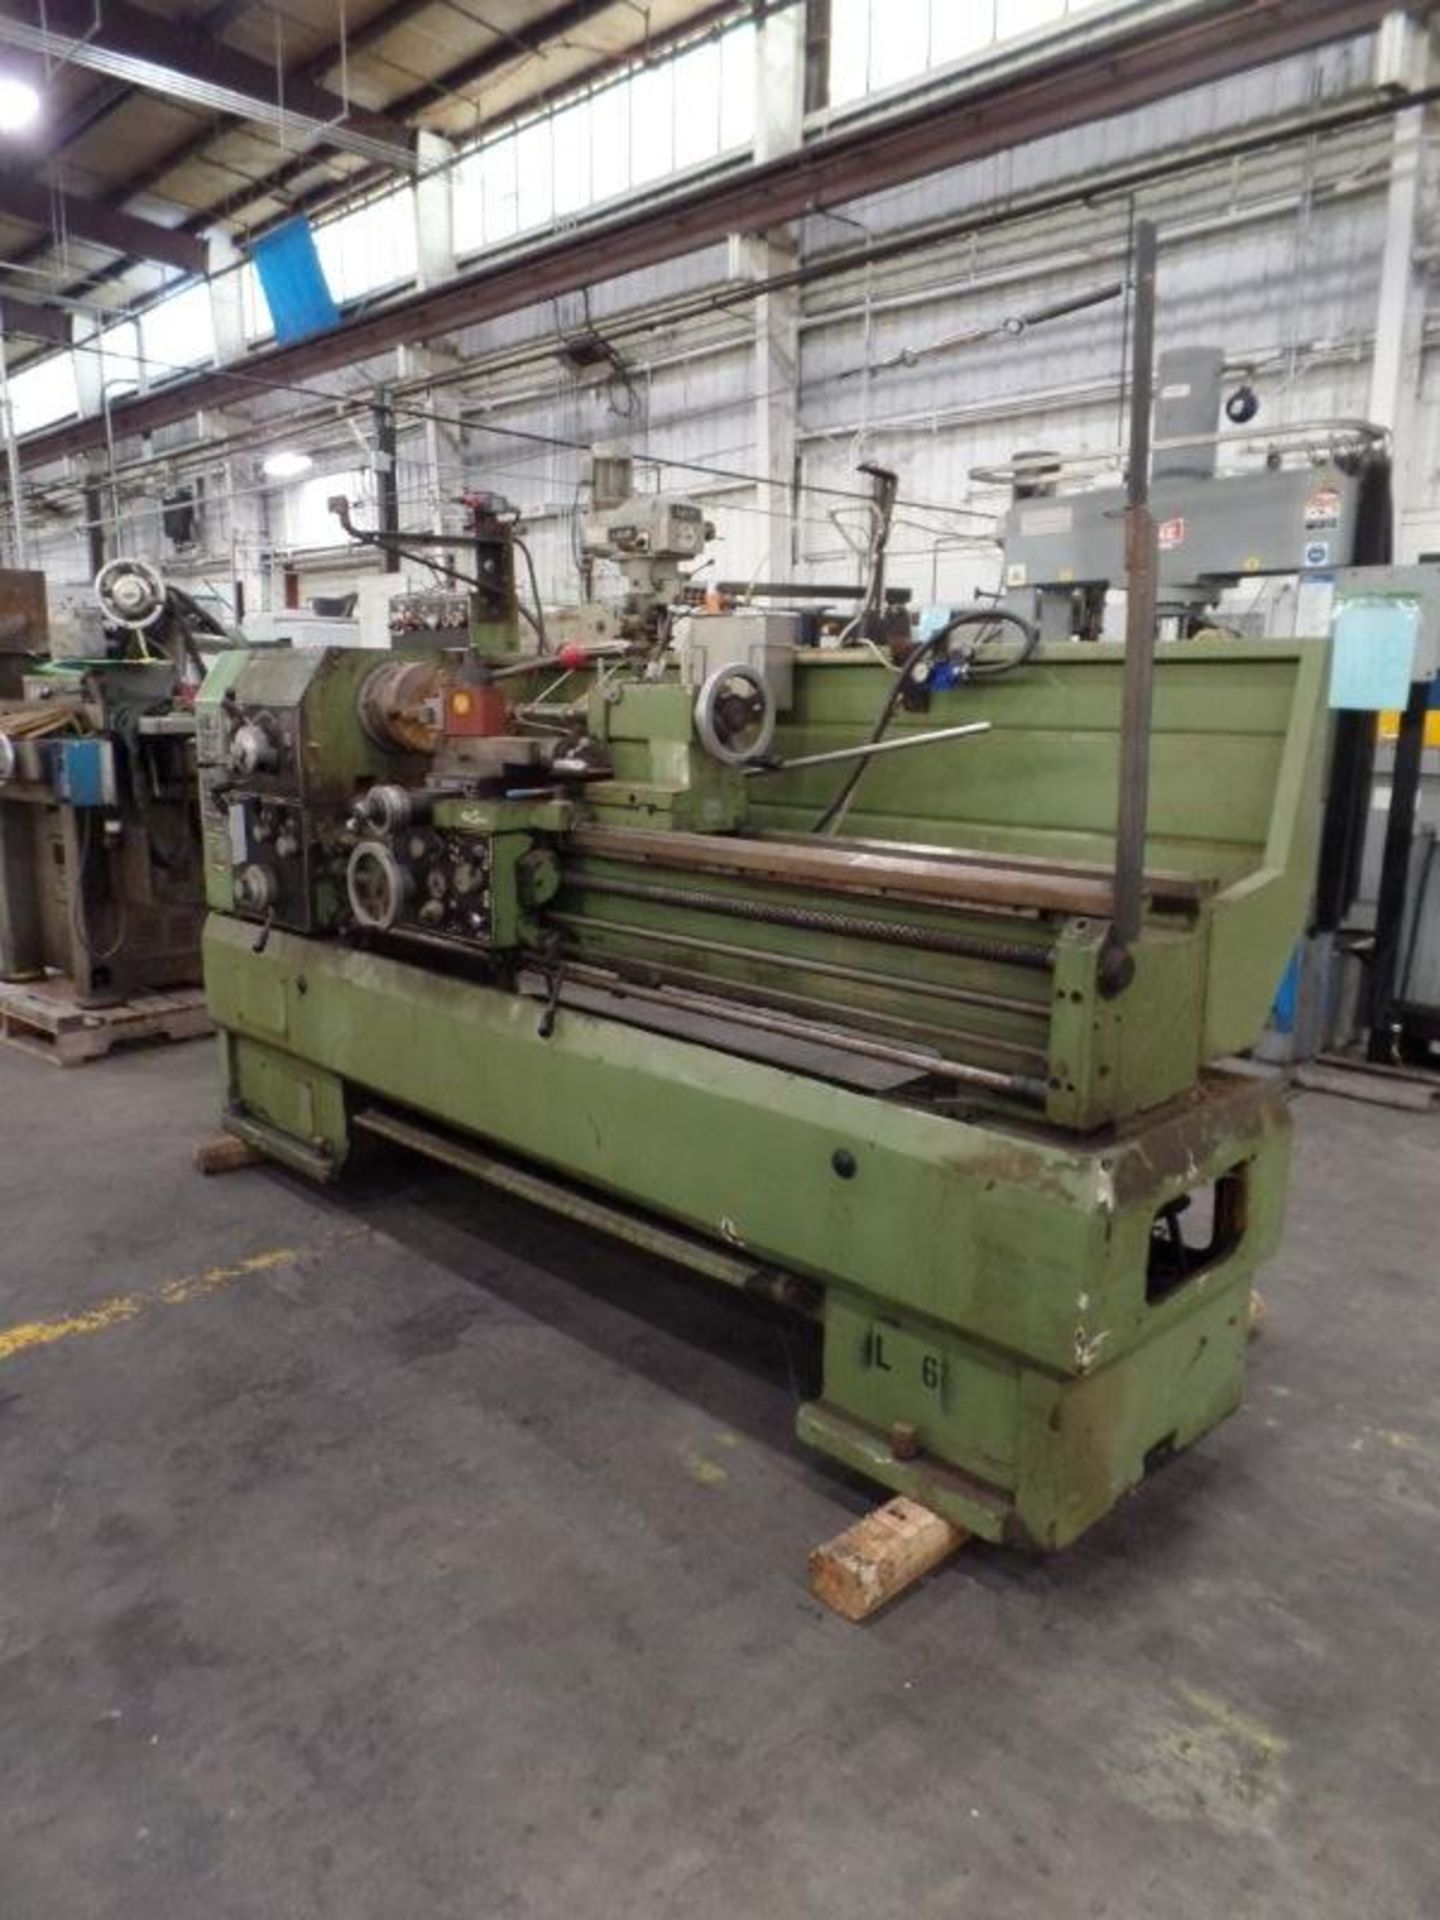 Enco 1111760 Manual Lathe, 8" Chuck, 56" Between Centers, s/n 104 - Image 4 of 10